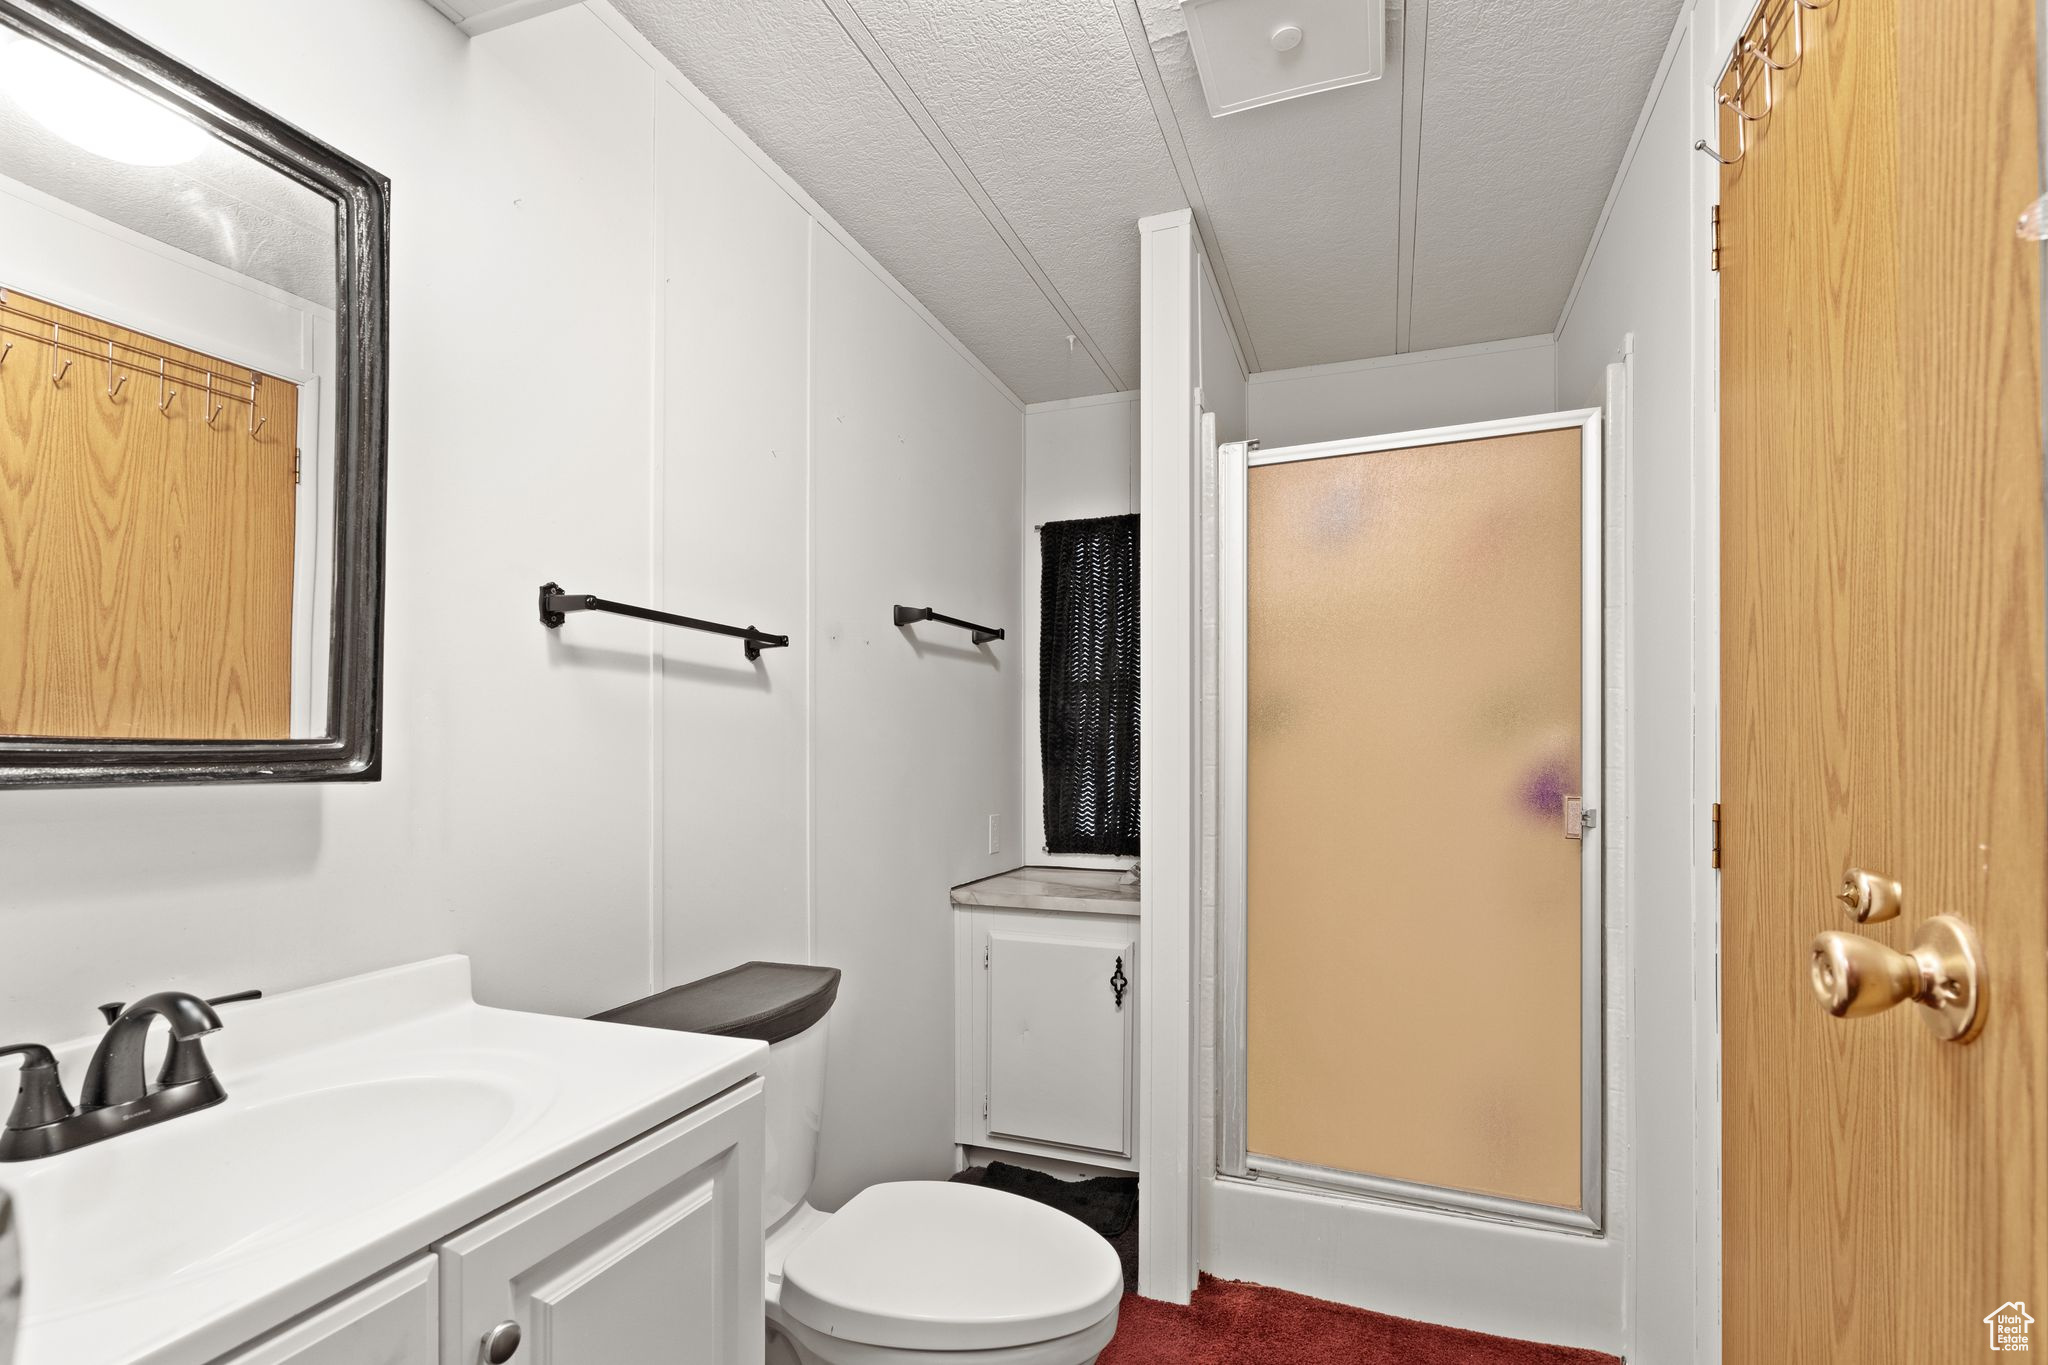 Bathroom featuring vanity, toilet, walk in shower, and a textured ceiling